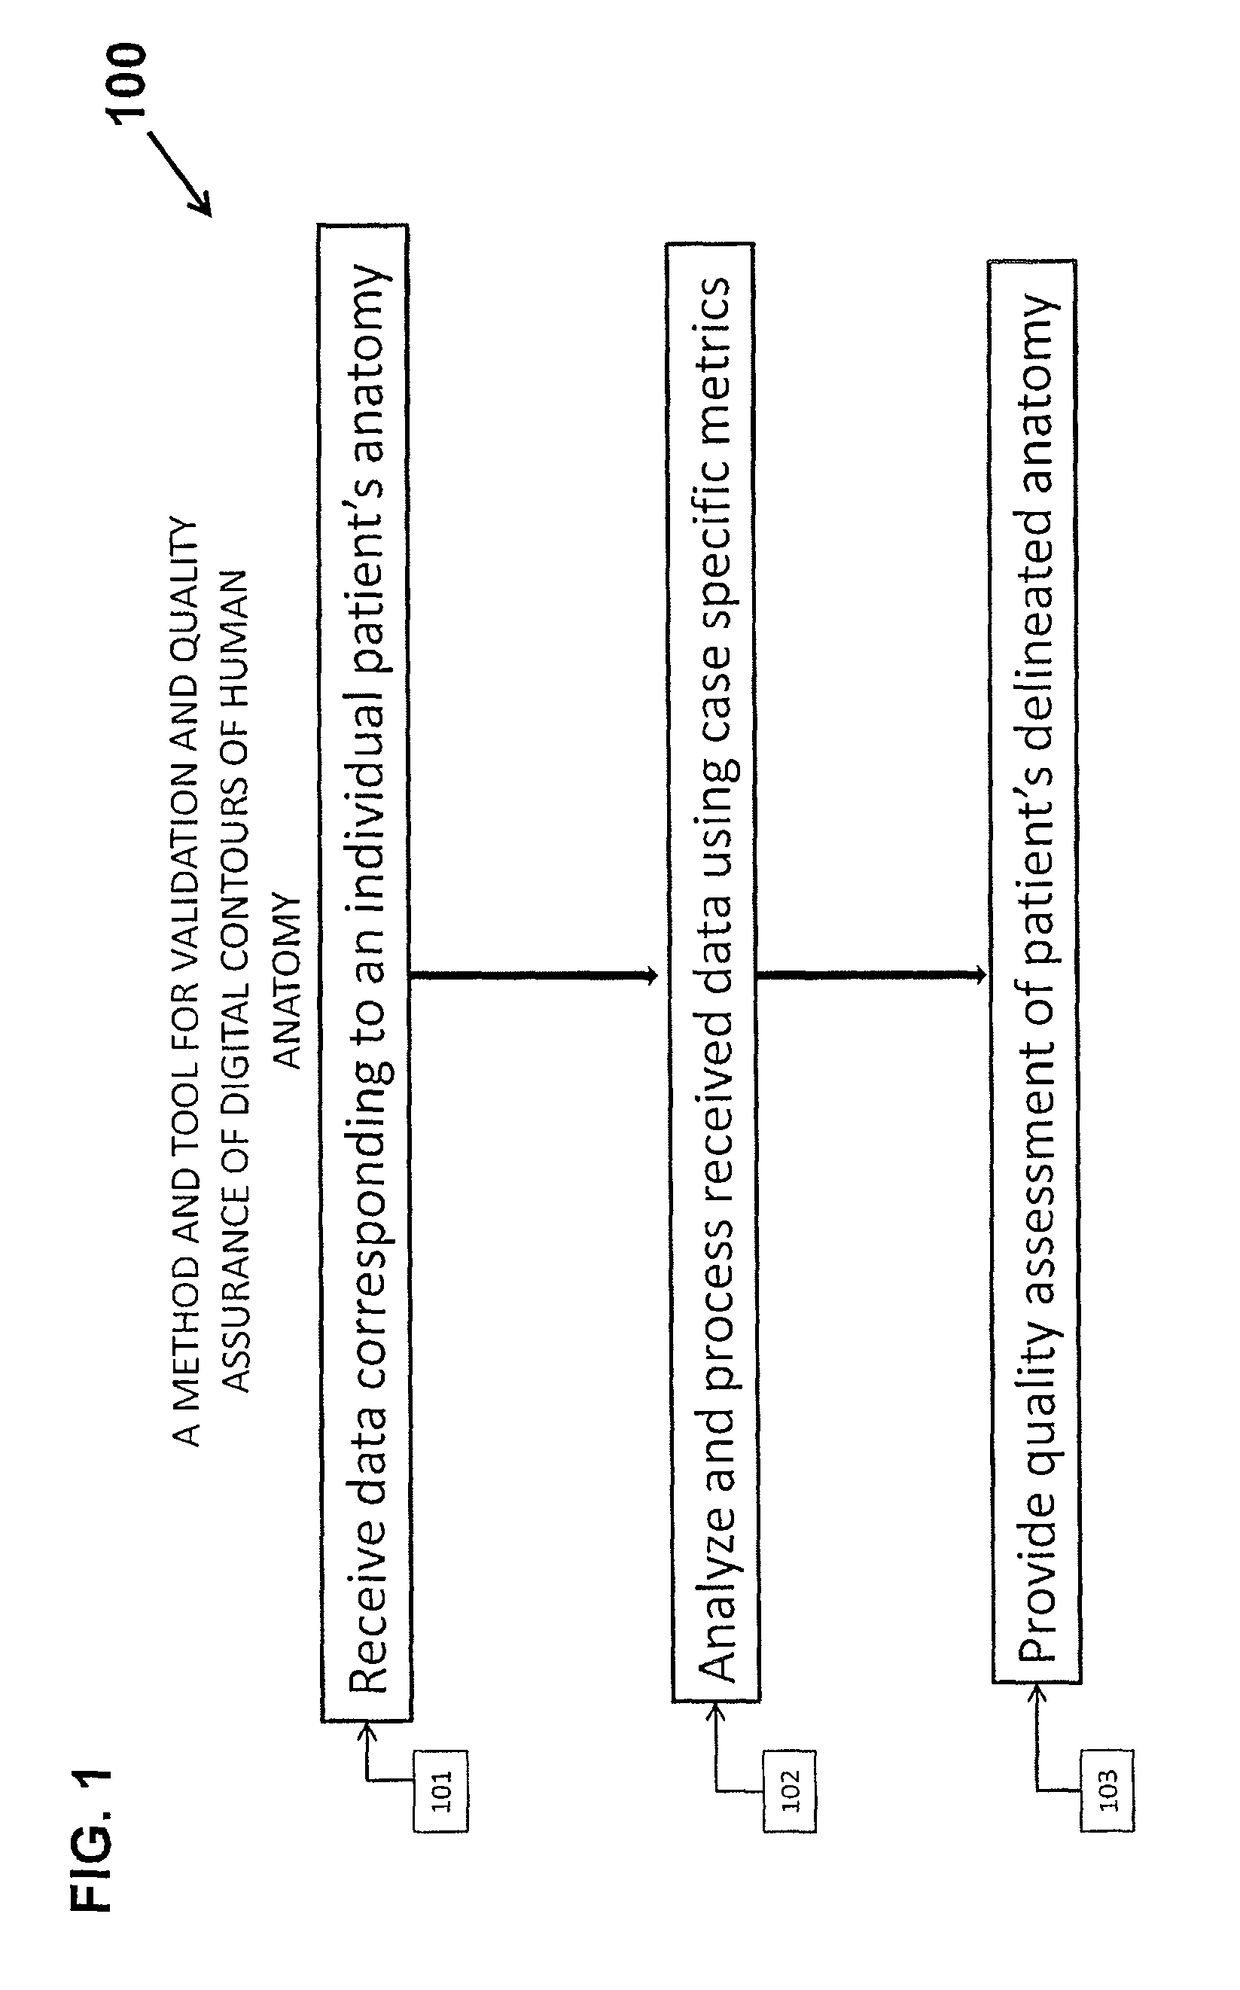 System and method for the validation and quality assurance of computerized contours of human anatomy